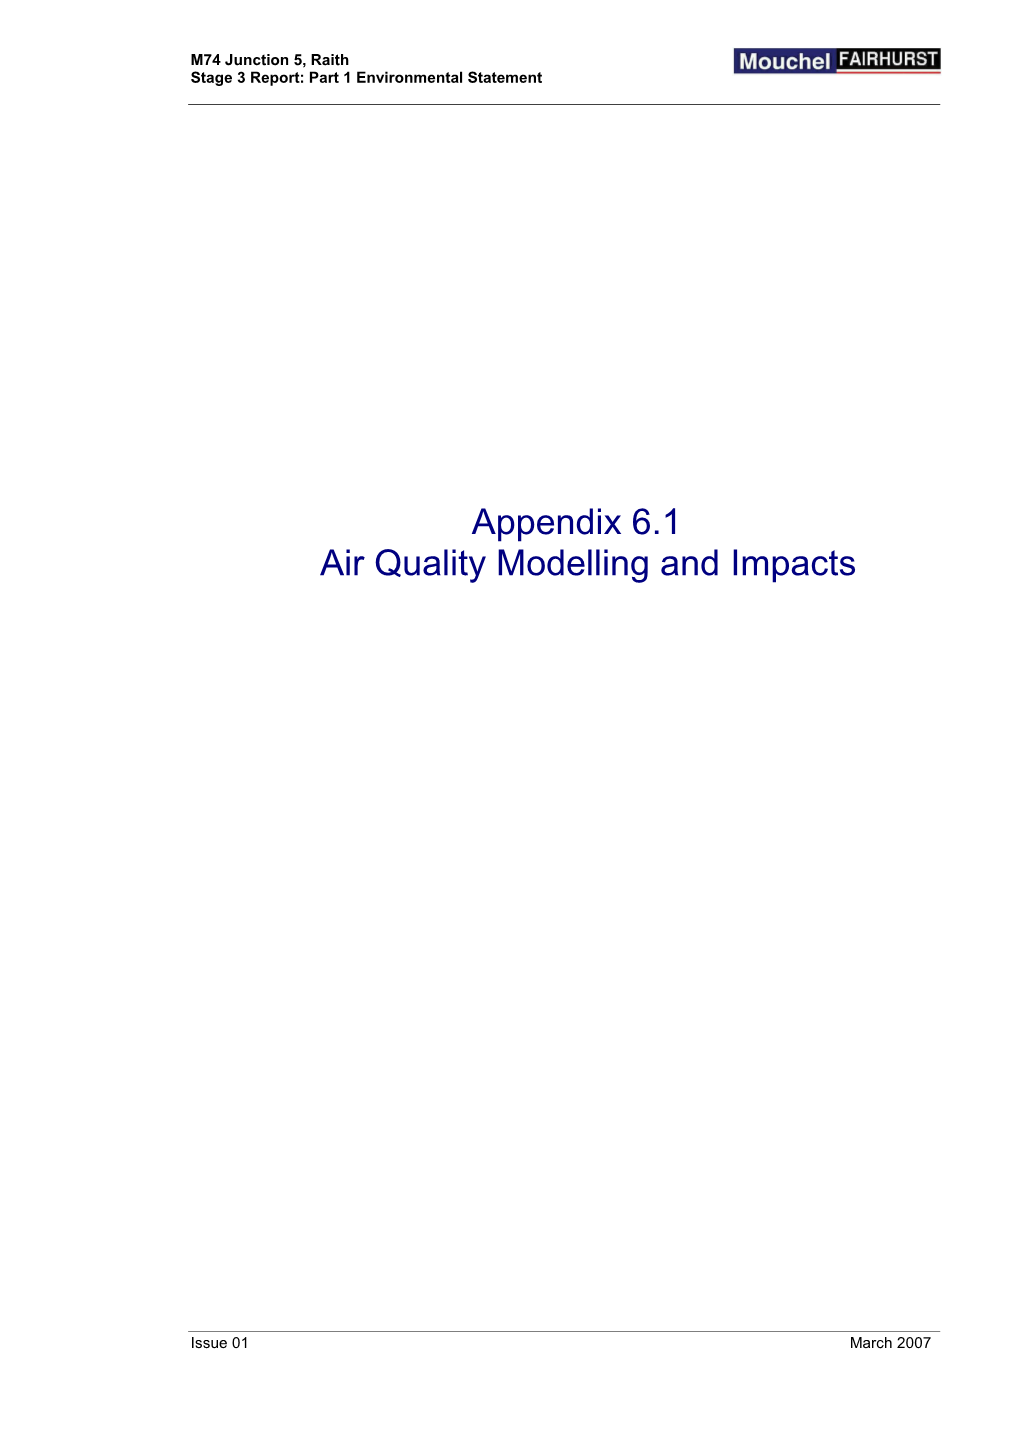 Appendix 6.1 Air Quality Modelling and Impacts